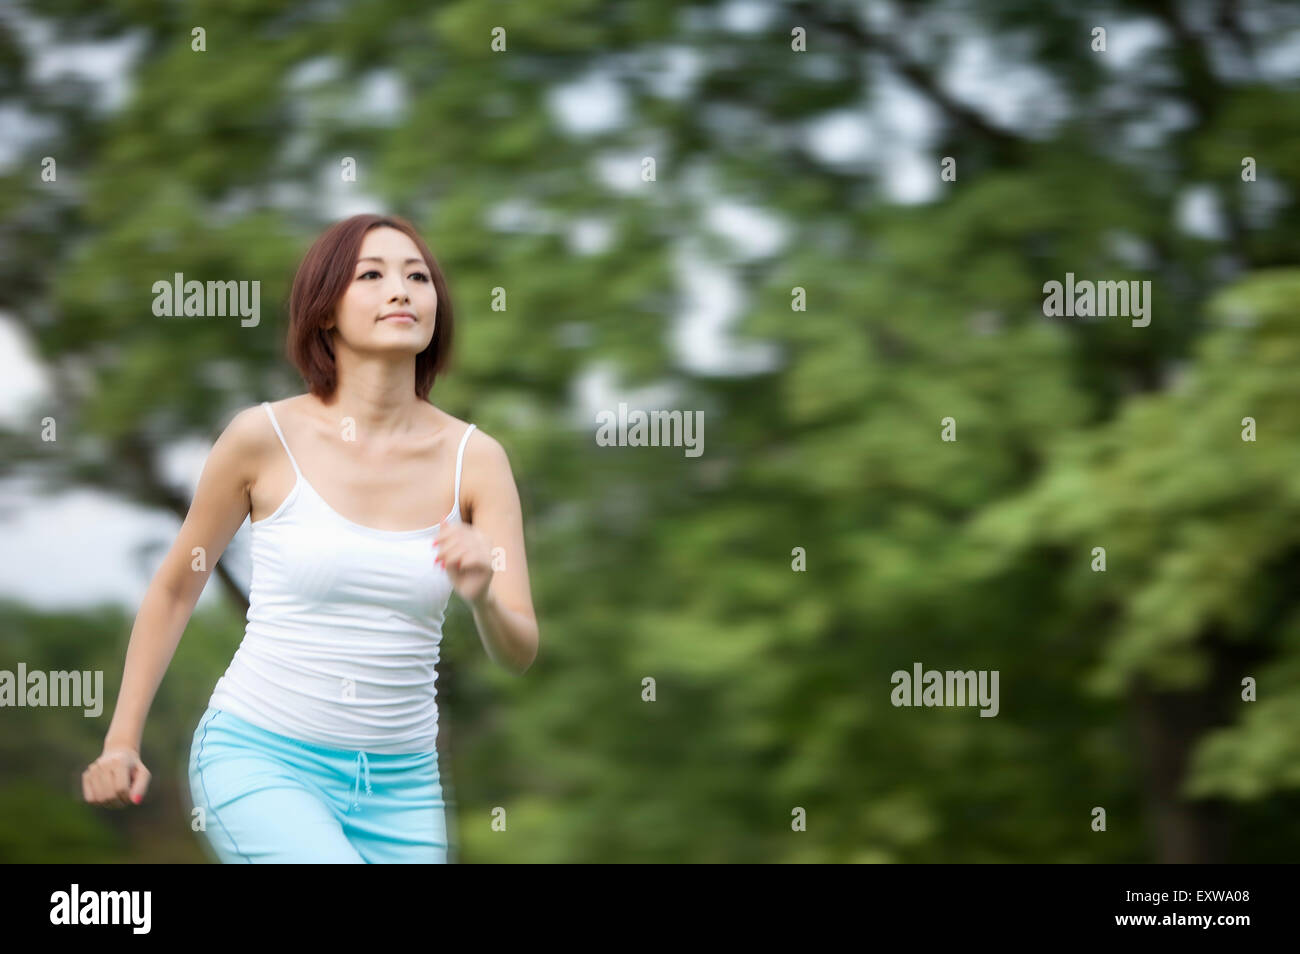 Young woman running and looking away, Stock Photo